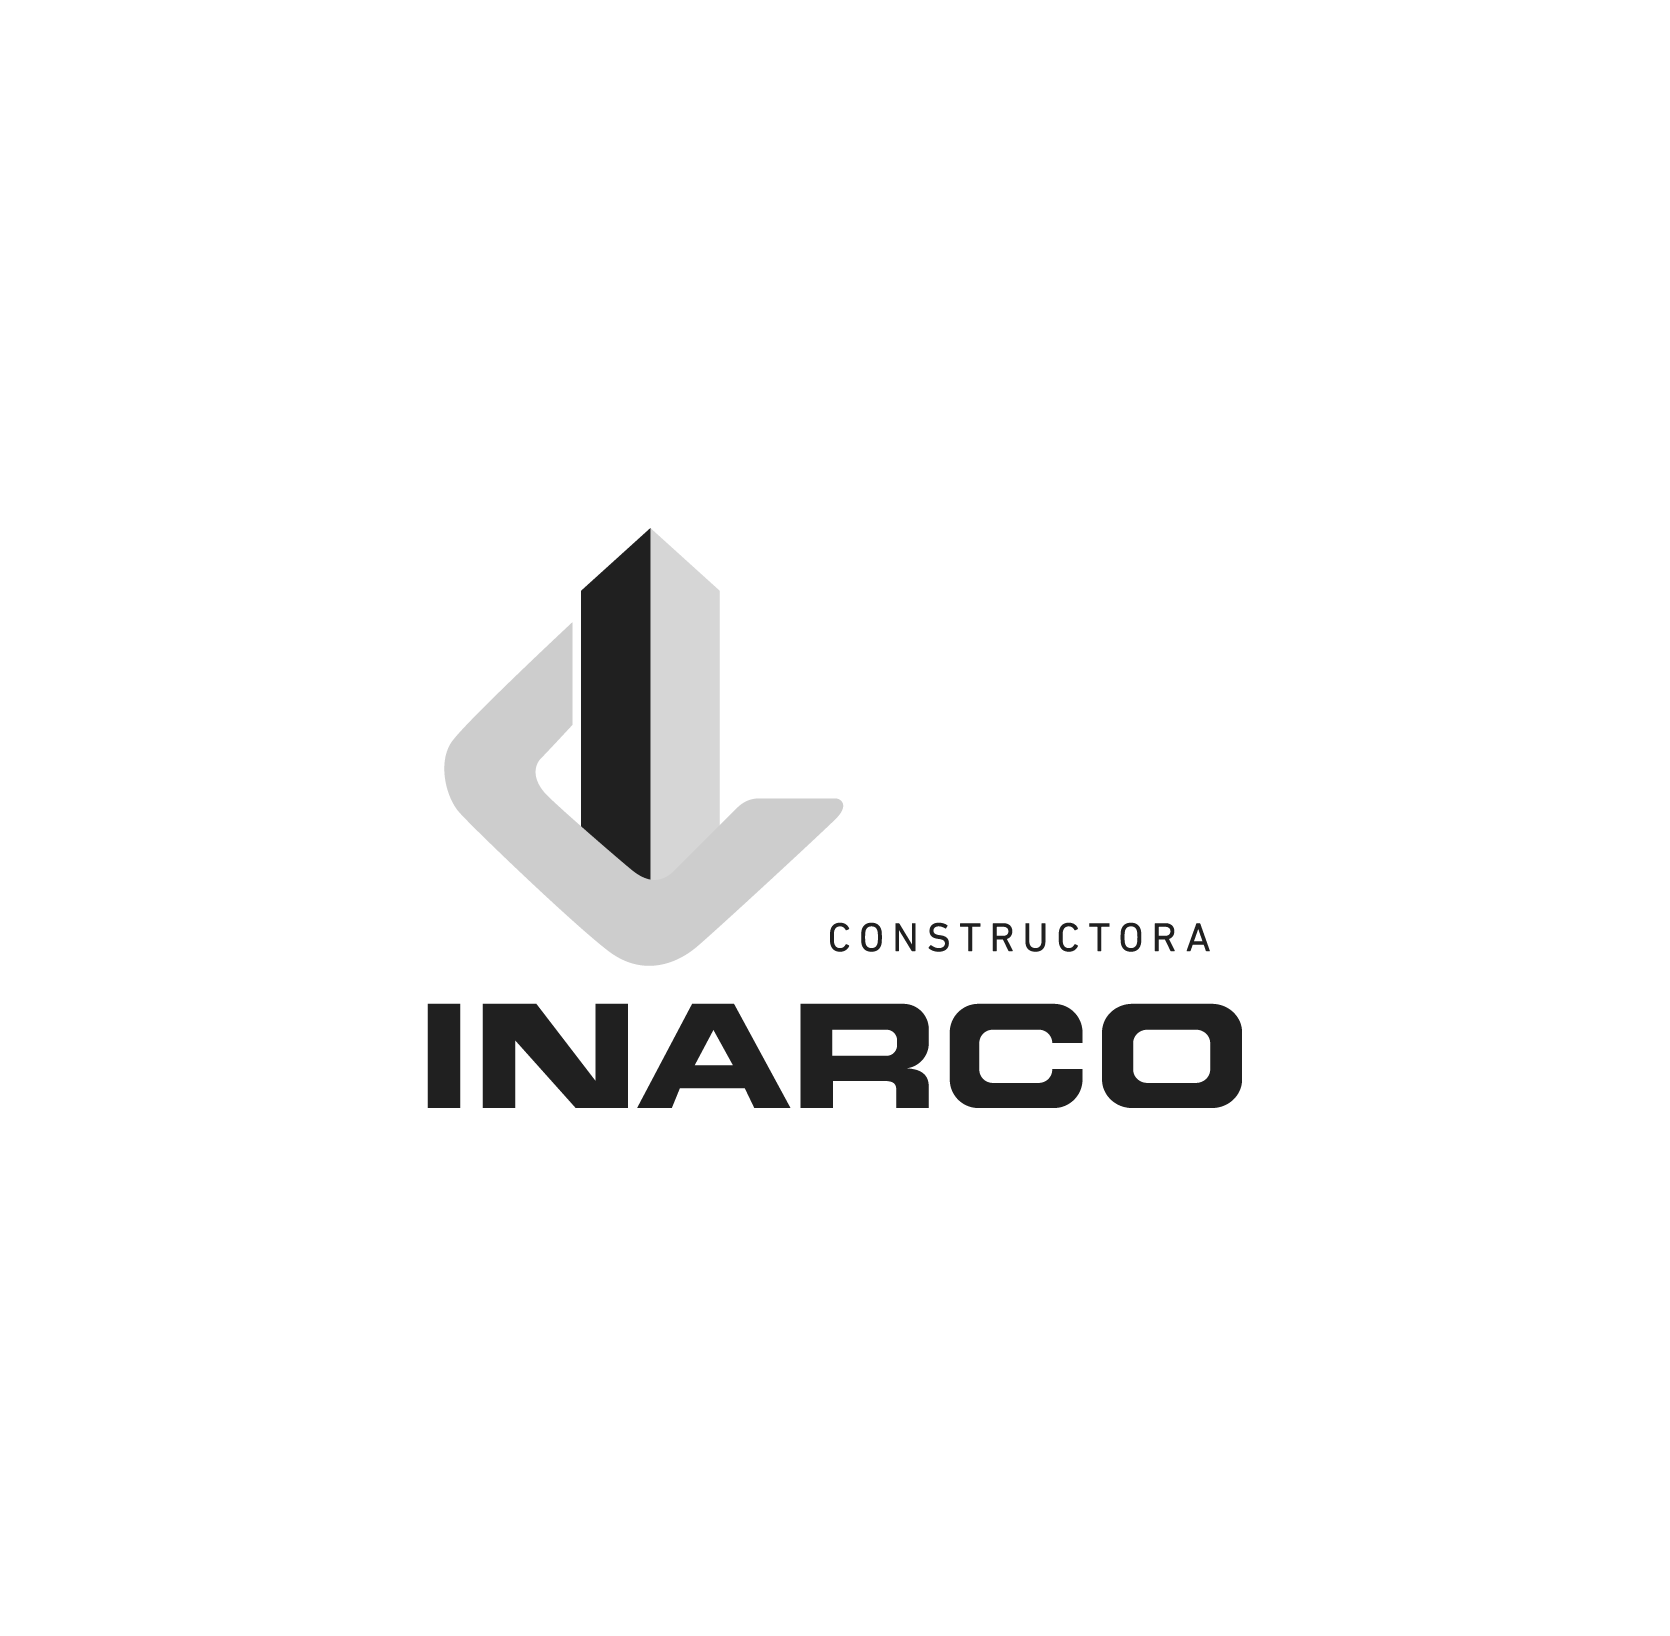 Inarco@4x.png